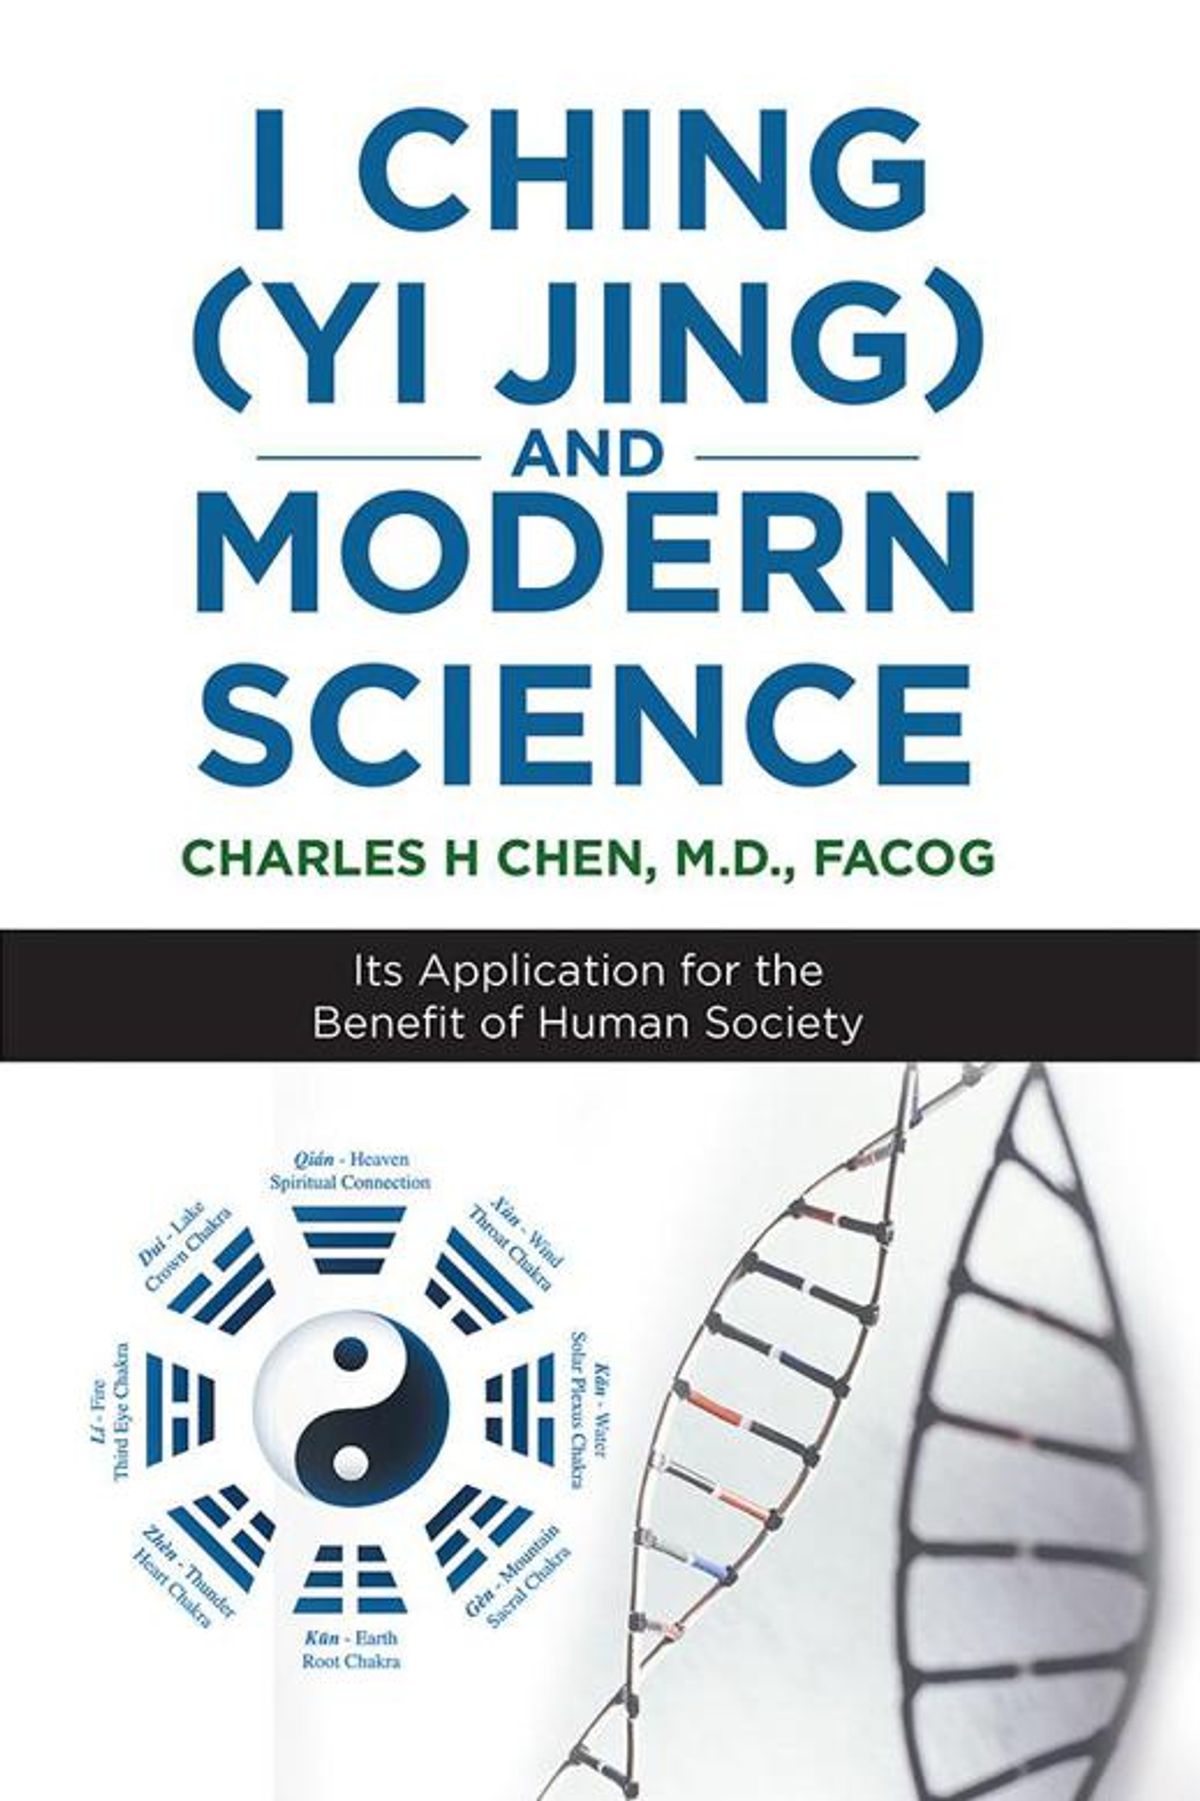 New Work by Charles H. Chen Reveals I Ching’s Consistency with Modern Science and DNA/RNA Codes